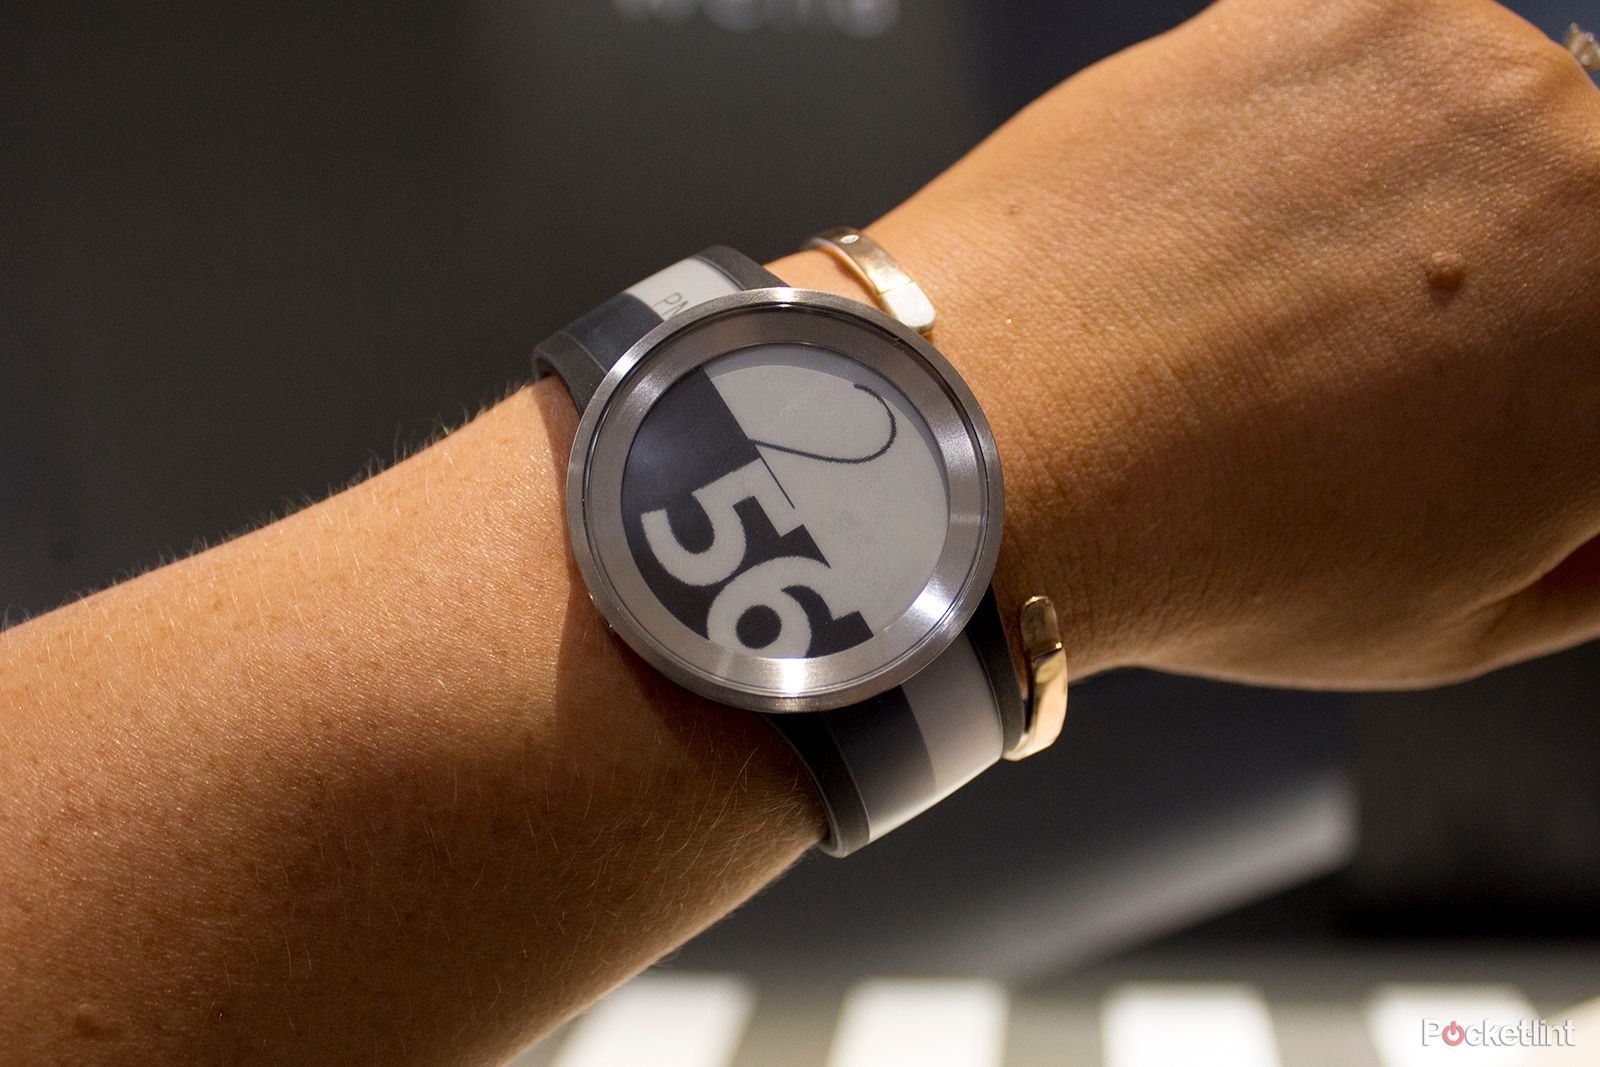 Sony crowdsourcing the updated FES Watch U e-ink watch - Android Community